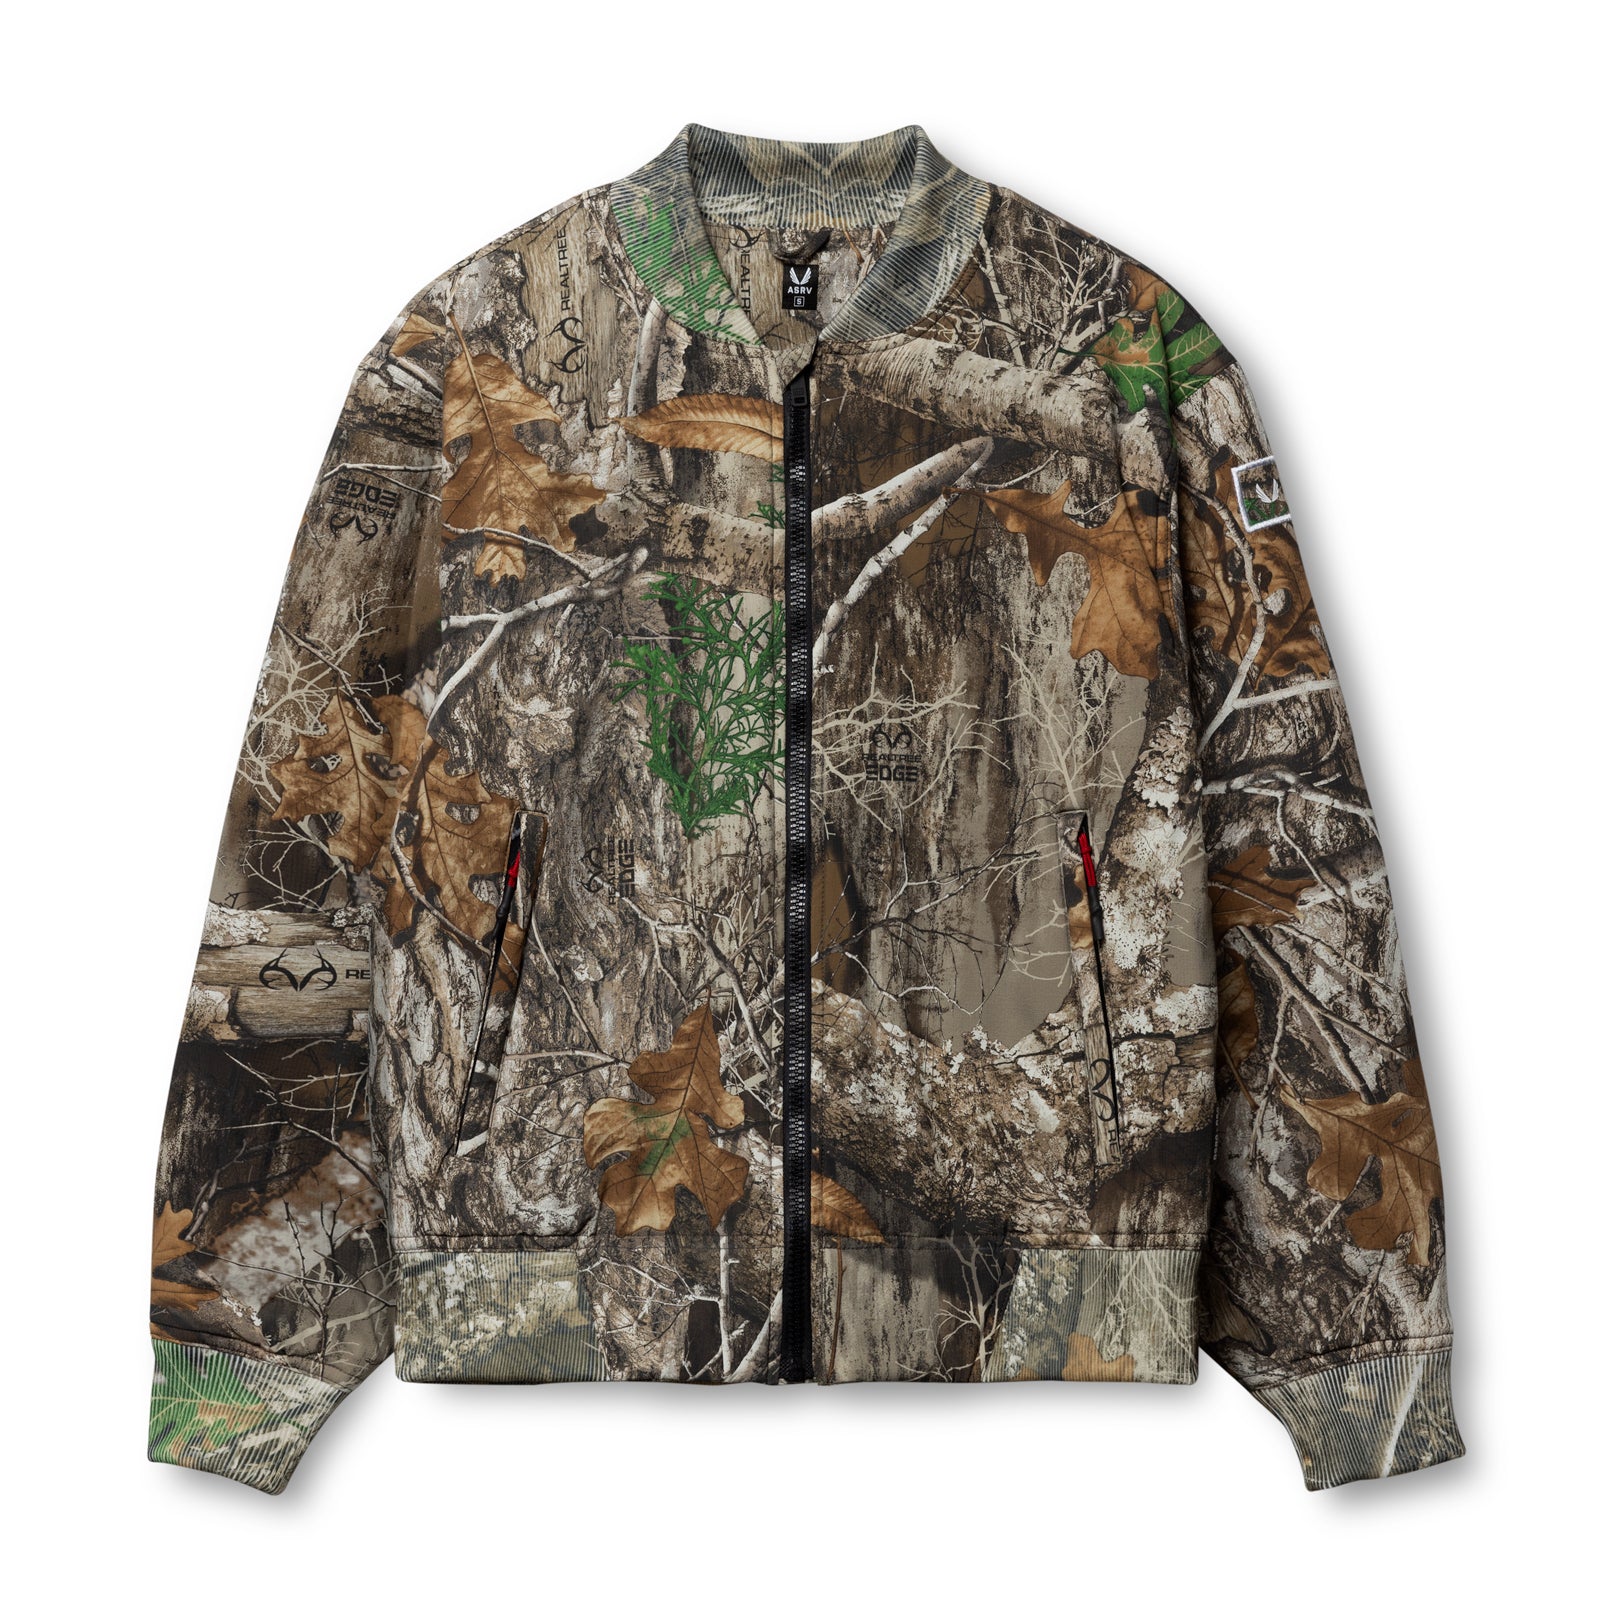 ASRV Ripstop Bomber Jacket - Realtree Camo - Due West